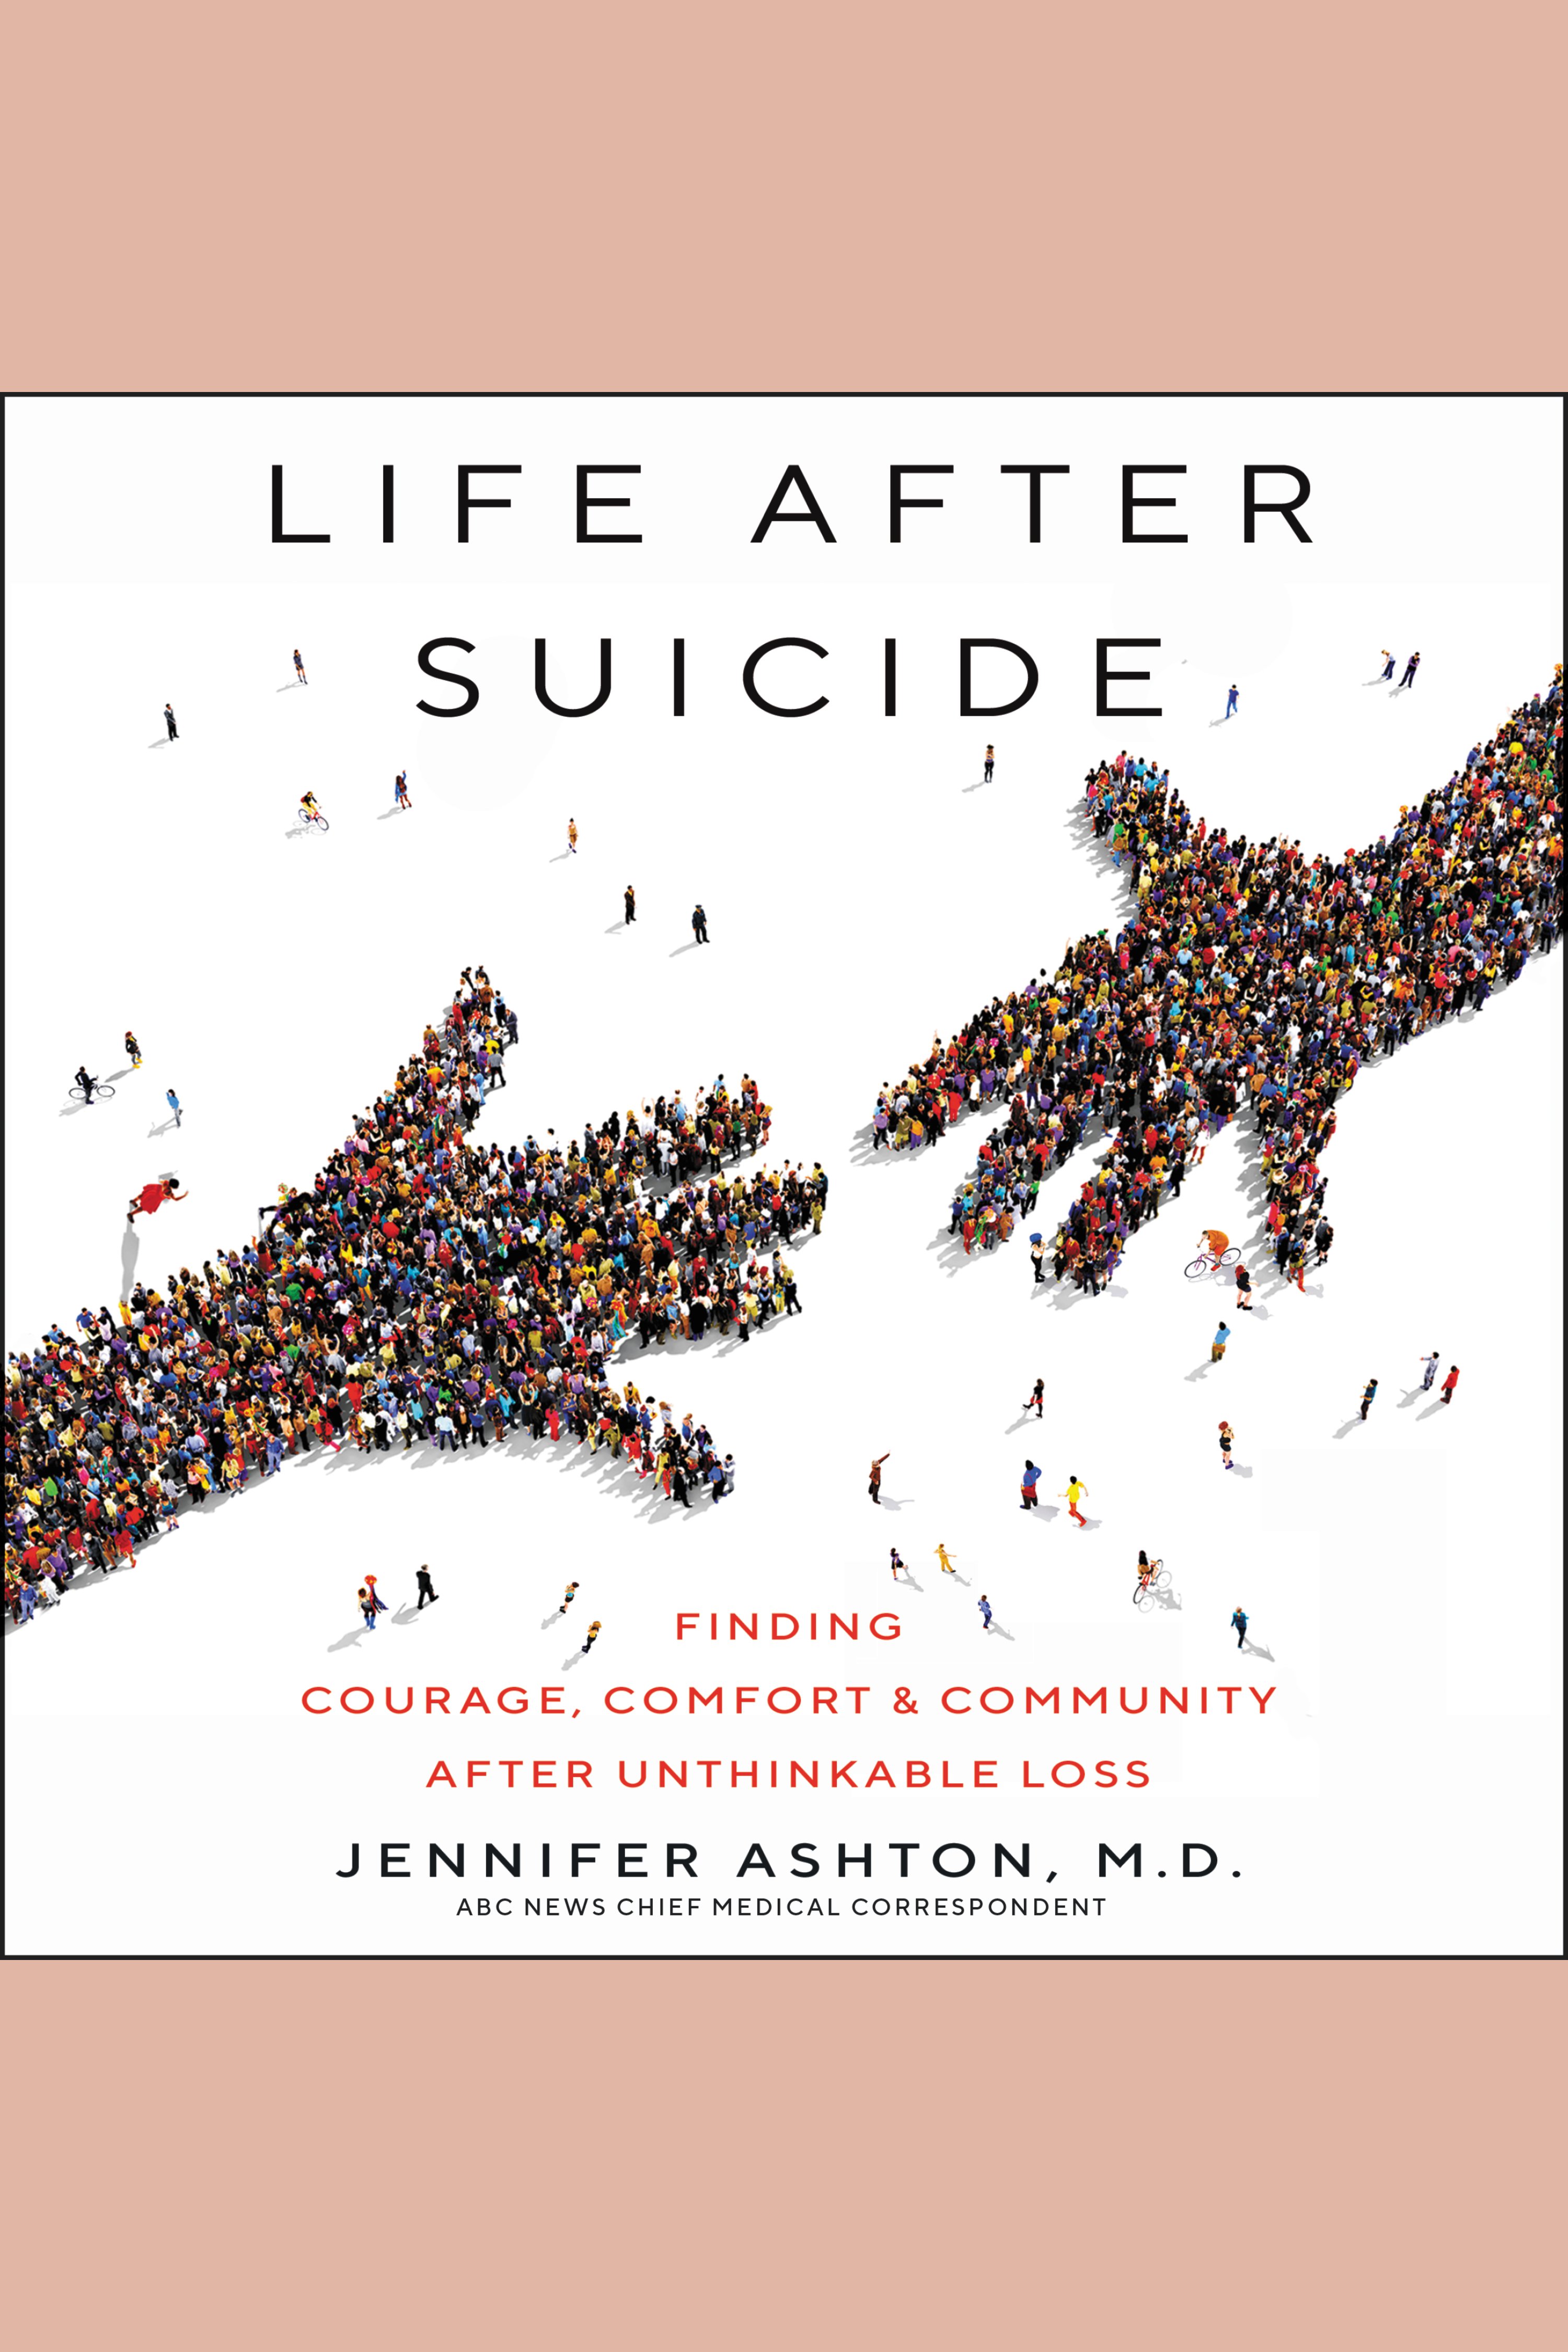 Umschlagbild für Life After Suicide [electronic resource] : Finding Courage, Comfort & Community After Unthinkable Loss